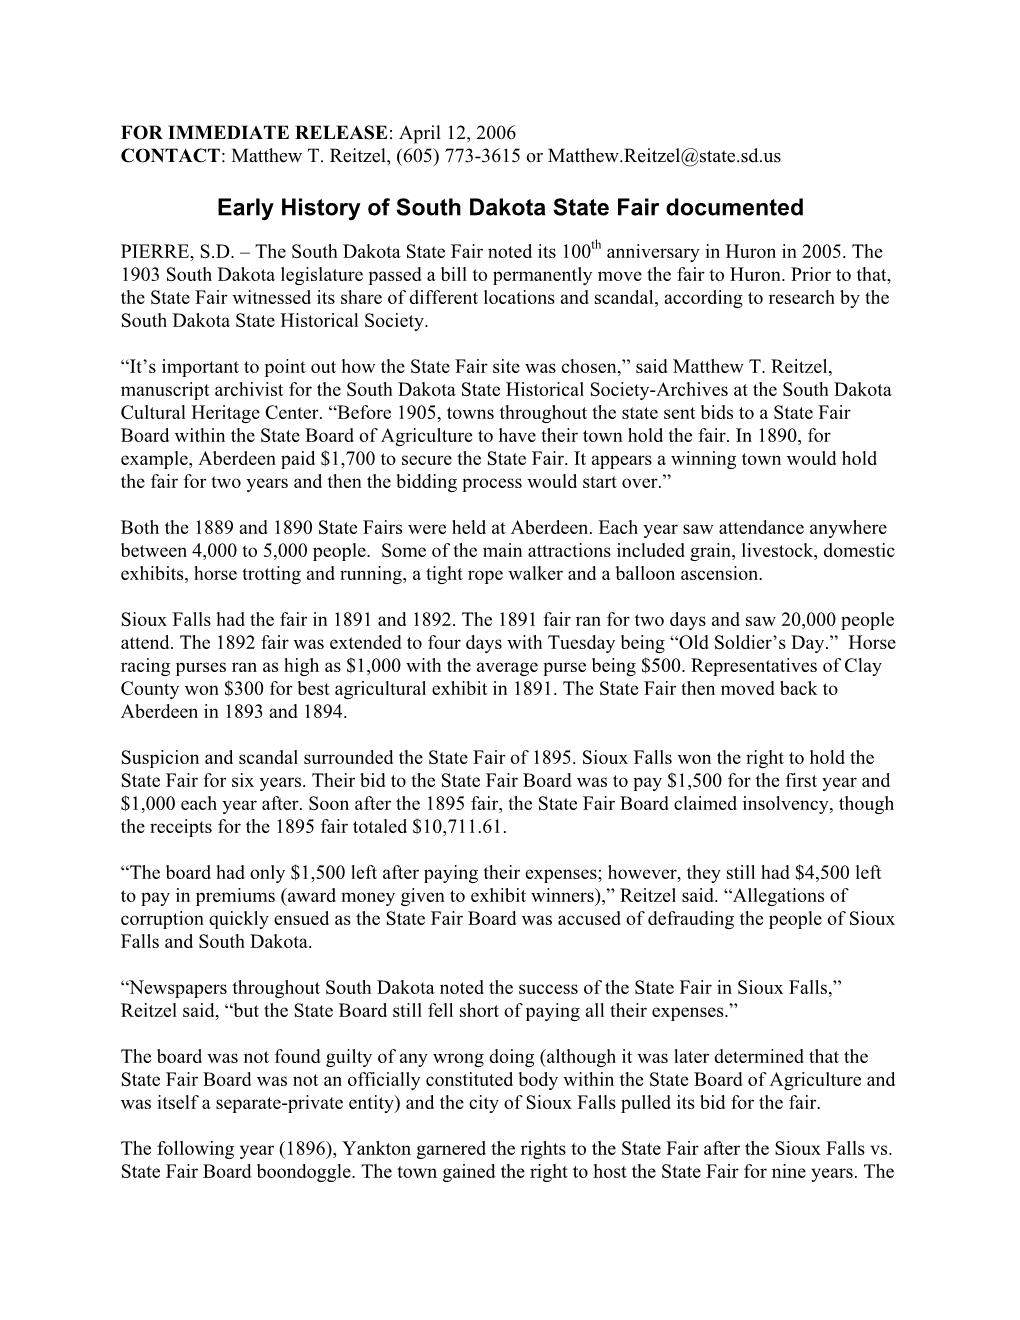 Early History of South Dakota State Fair Documented